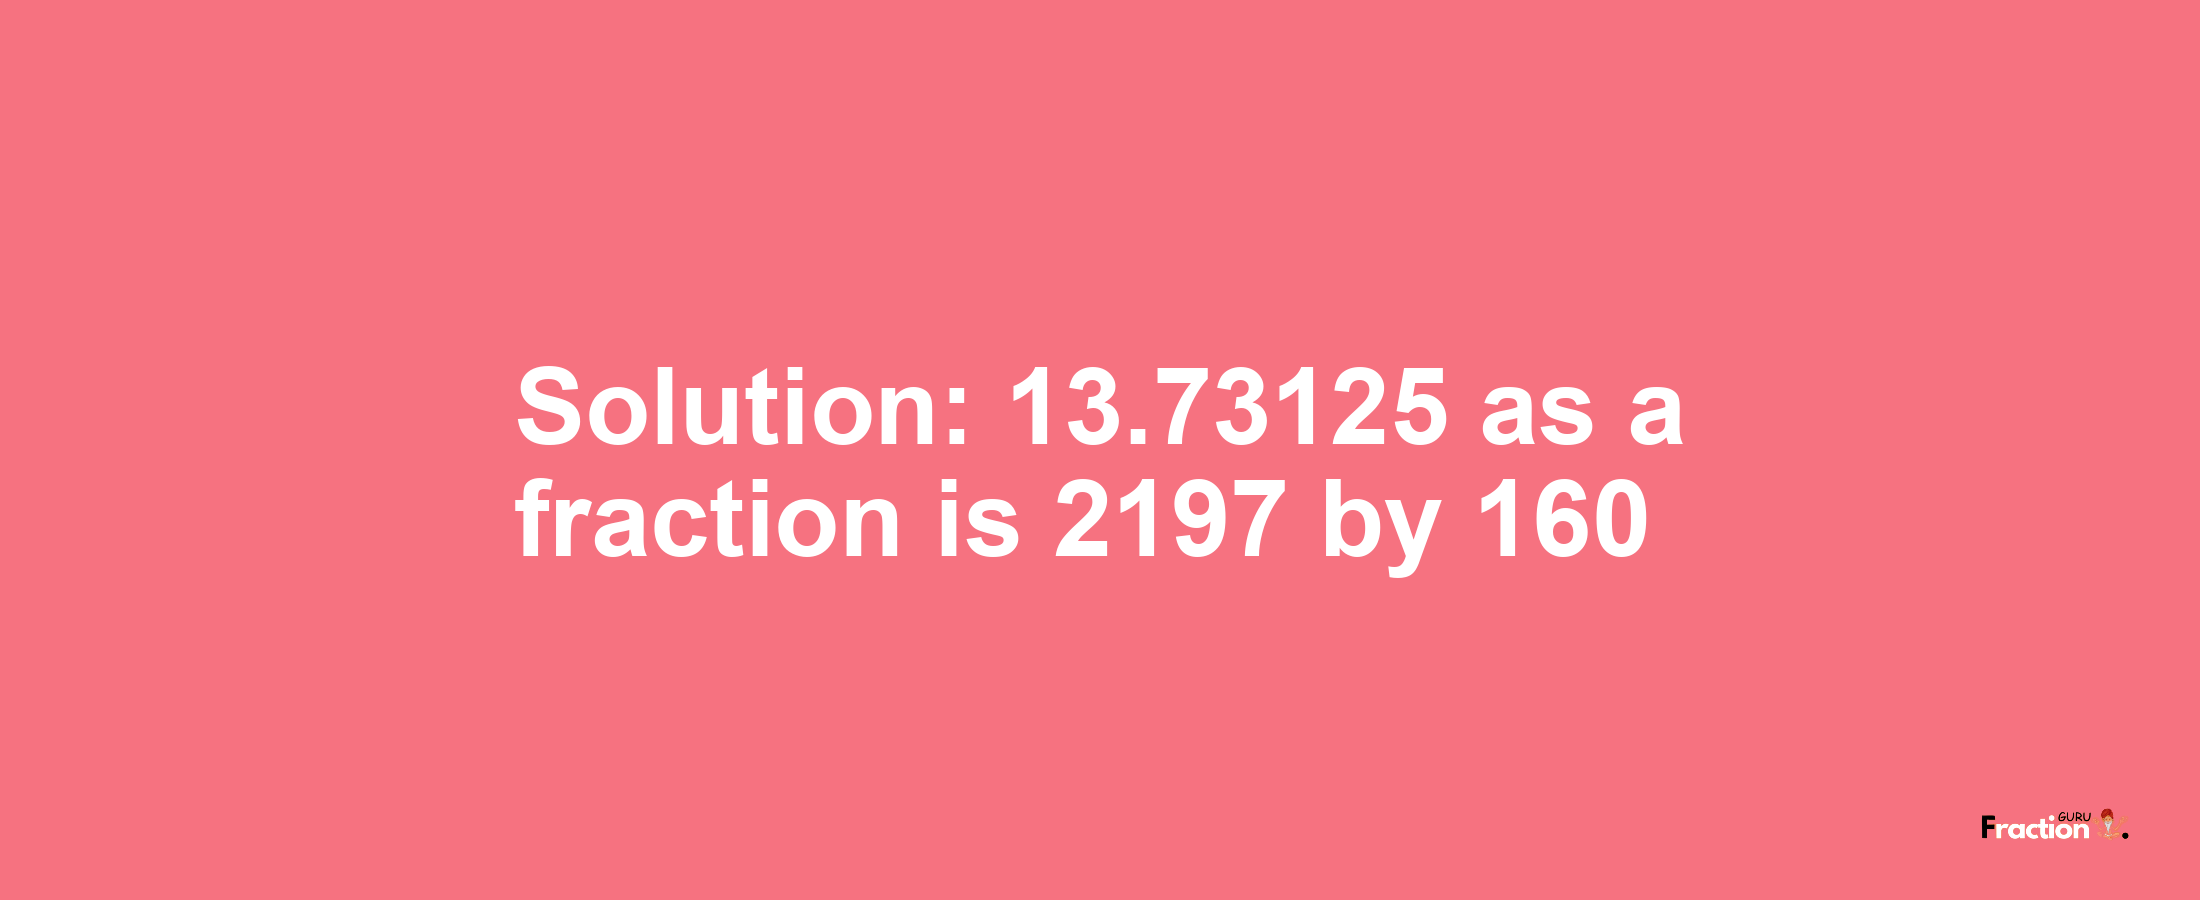 Solution:13.73125 as a fraction is 2197/160